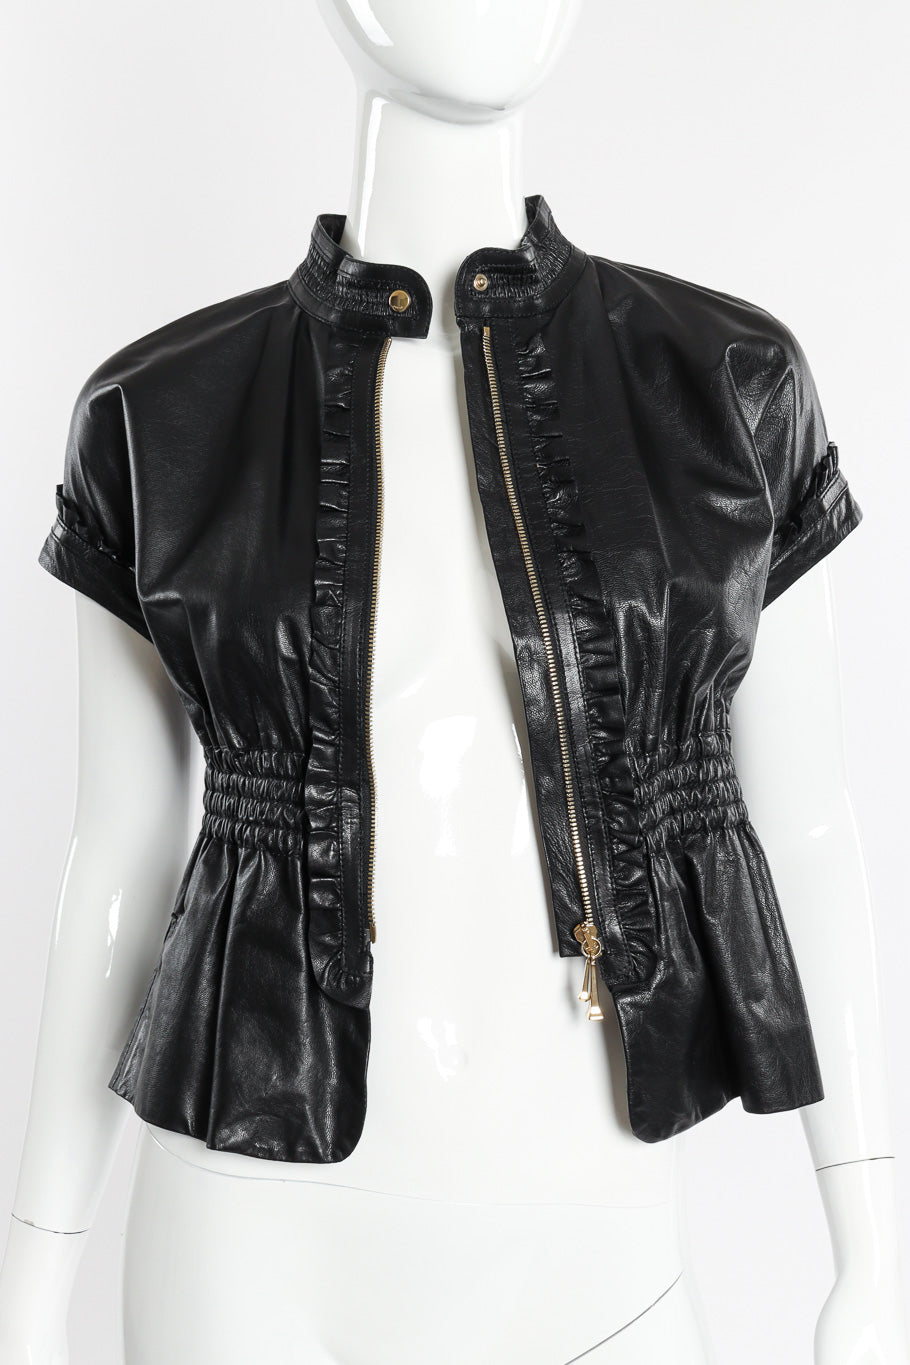 Gucci Leather Ruffle Top front view unzipped on mannequin @Recessla